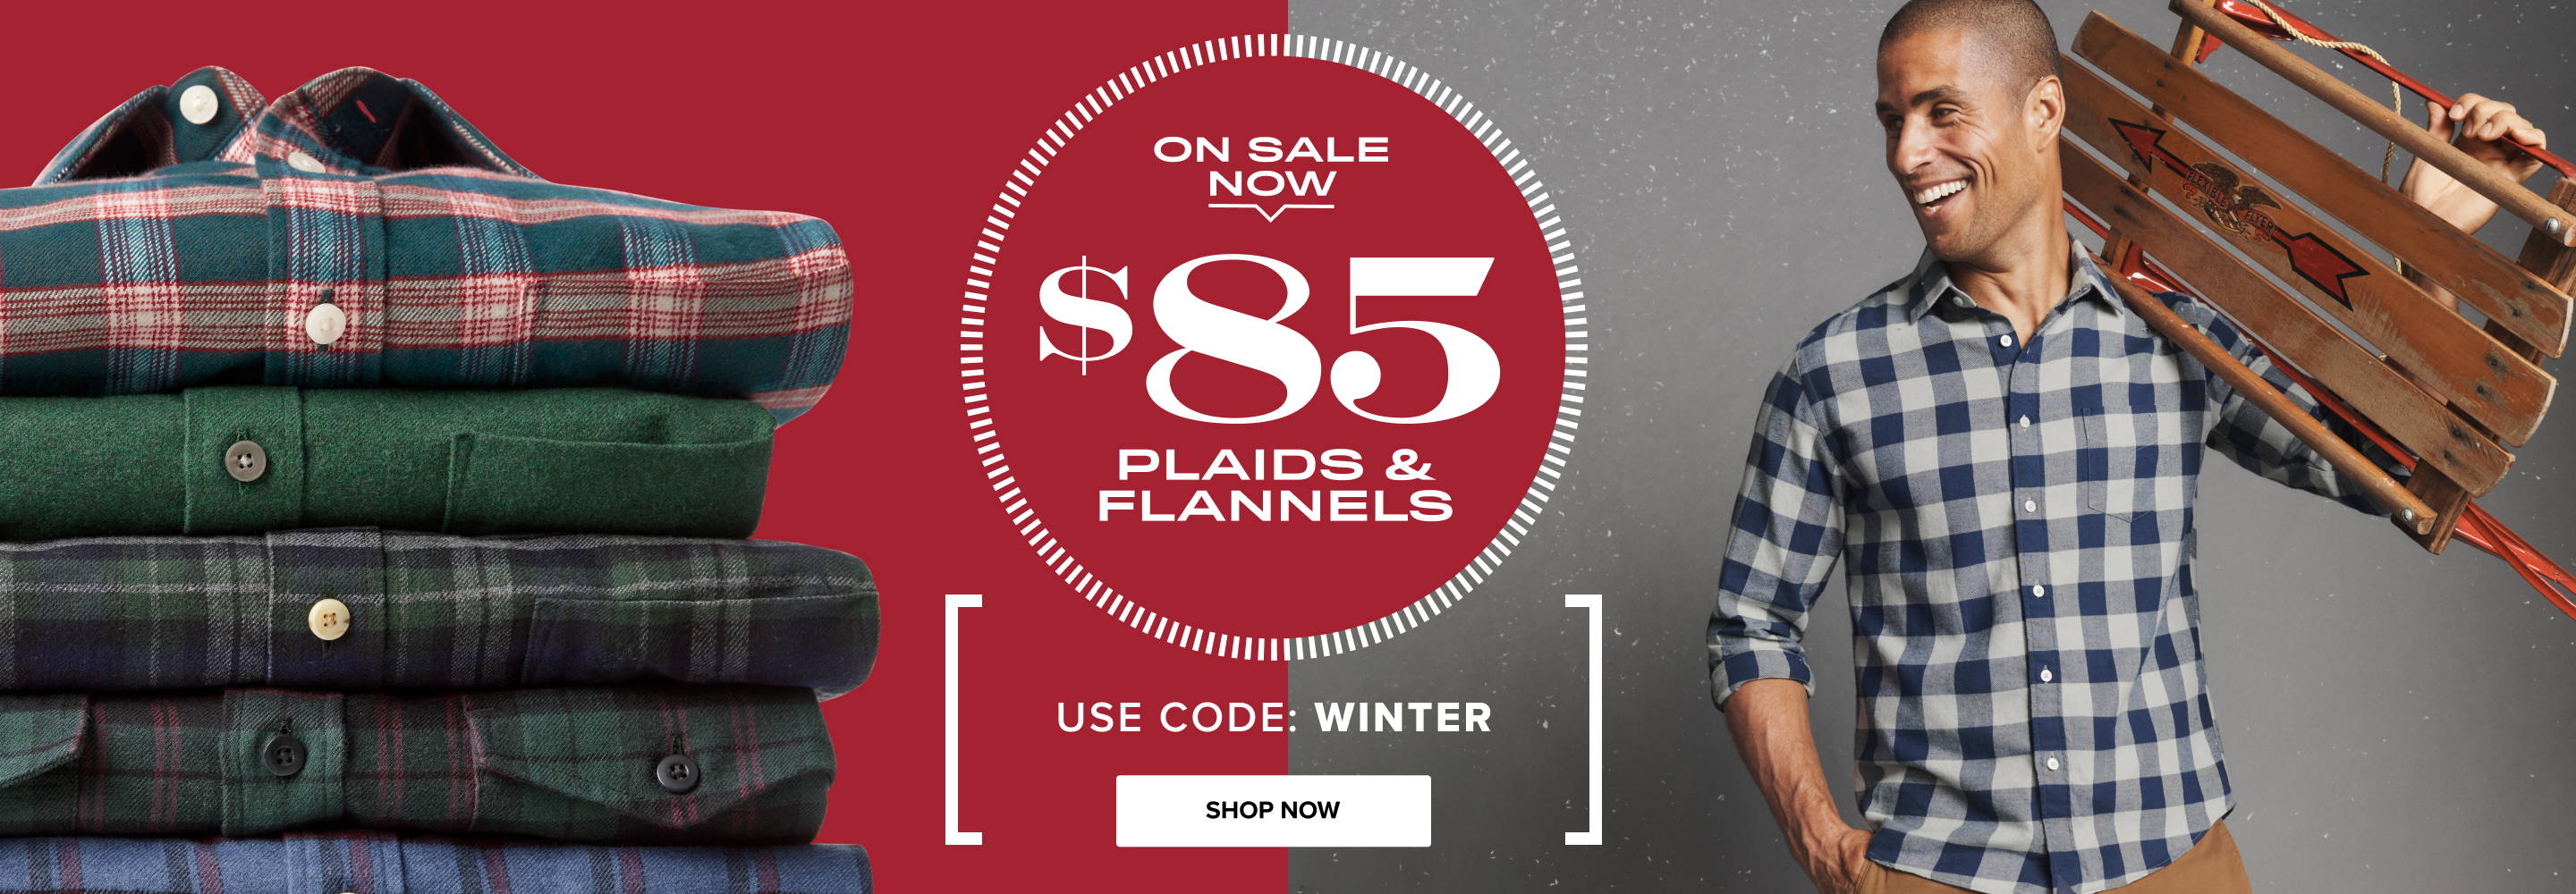 $85 Plaids & Flannels Use Code WINTER